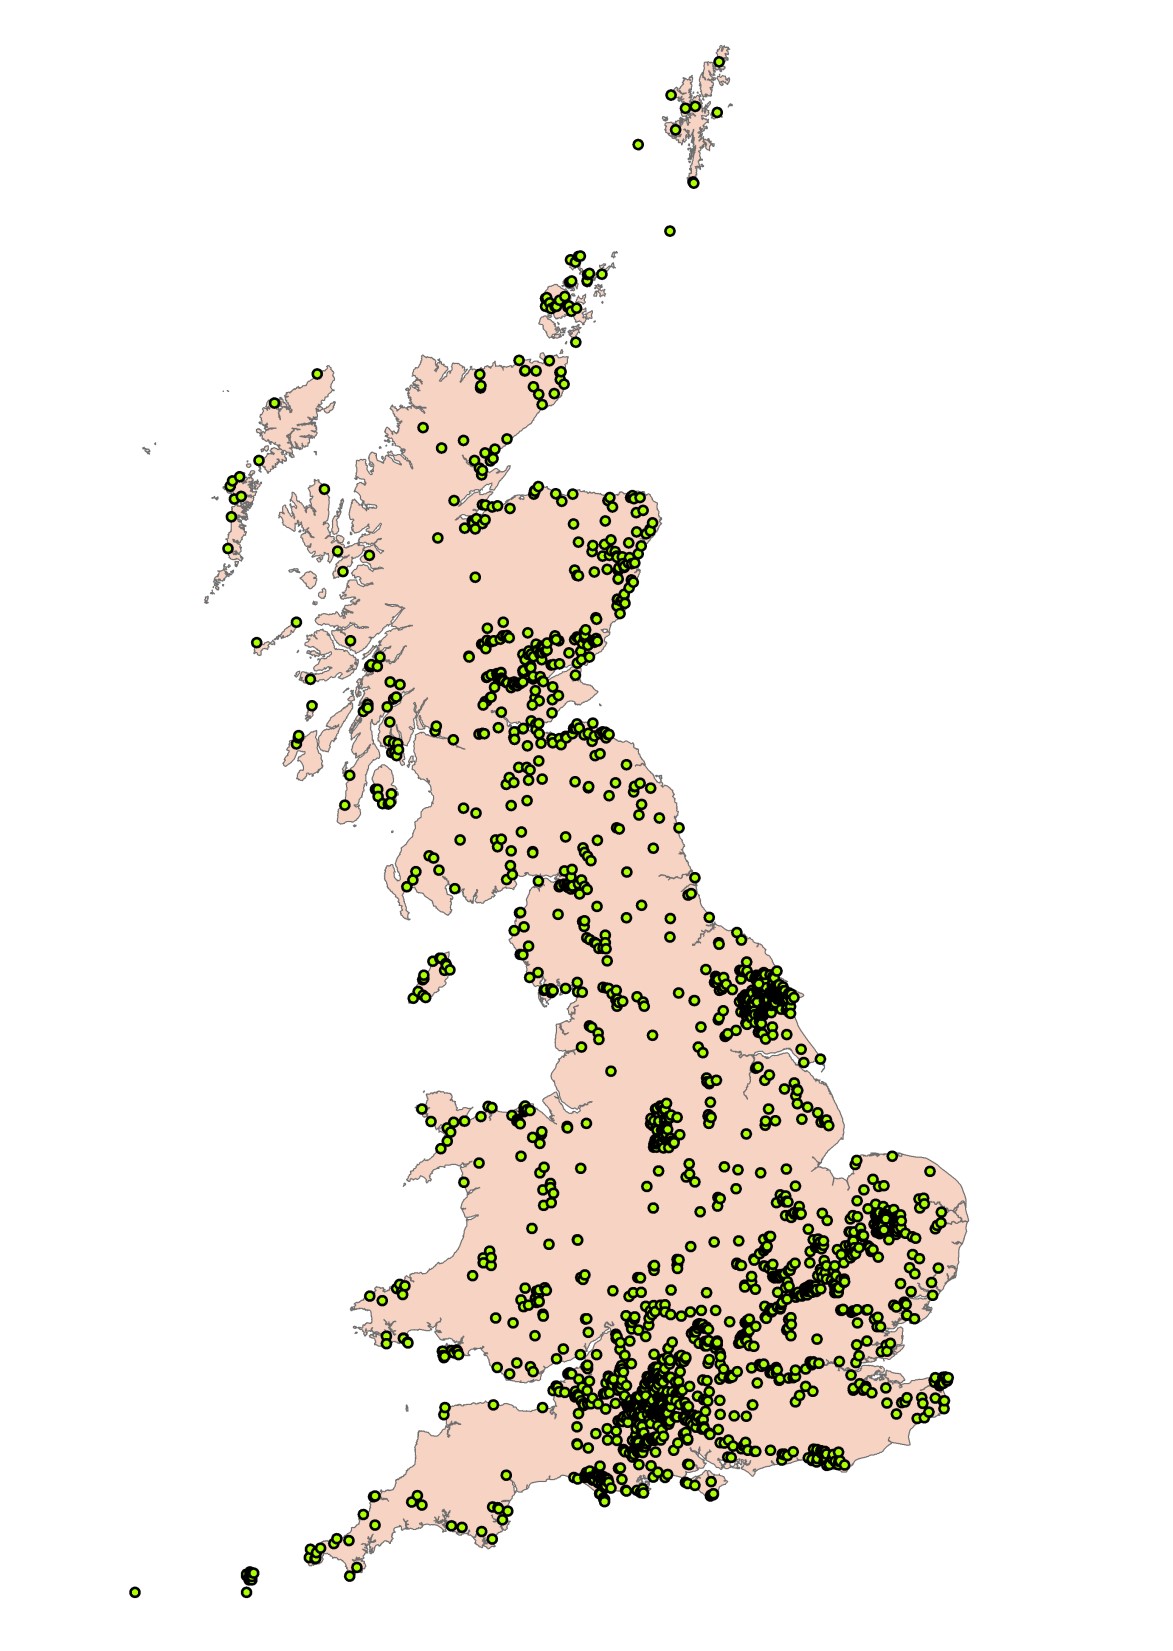 Map showing distribution of recorded burial sites in the Invisible Dead database for Britain